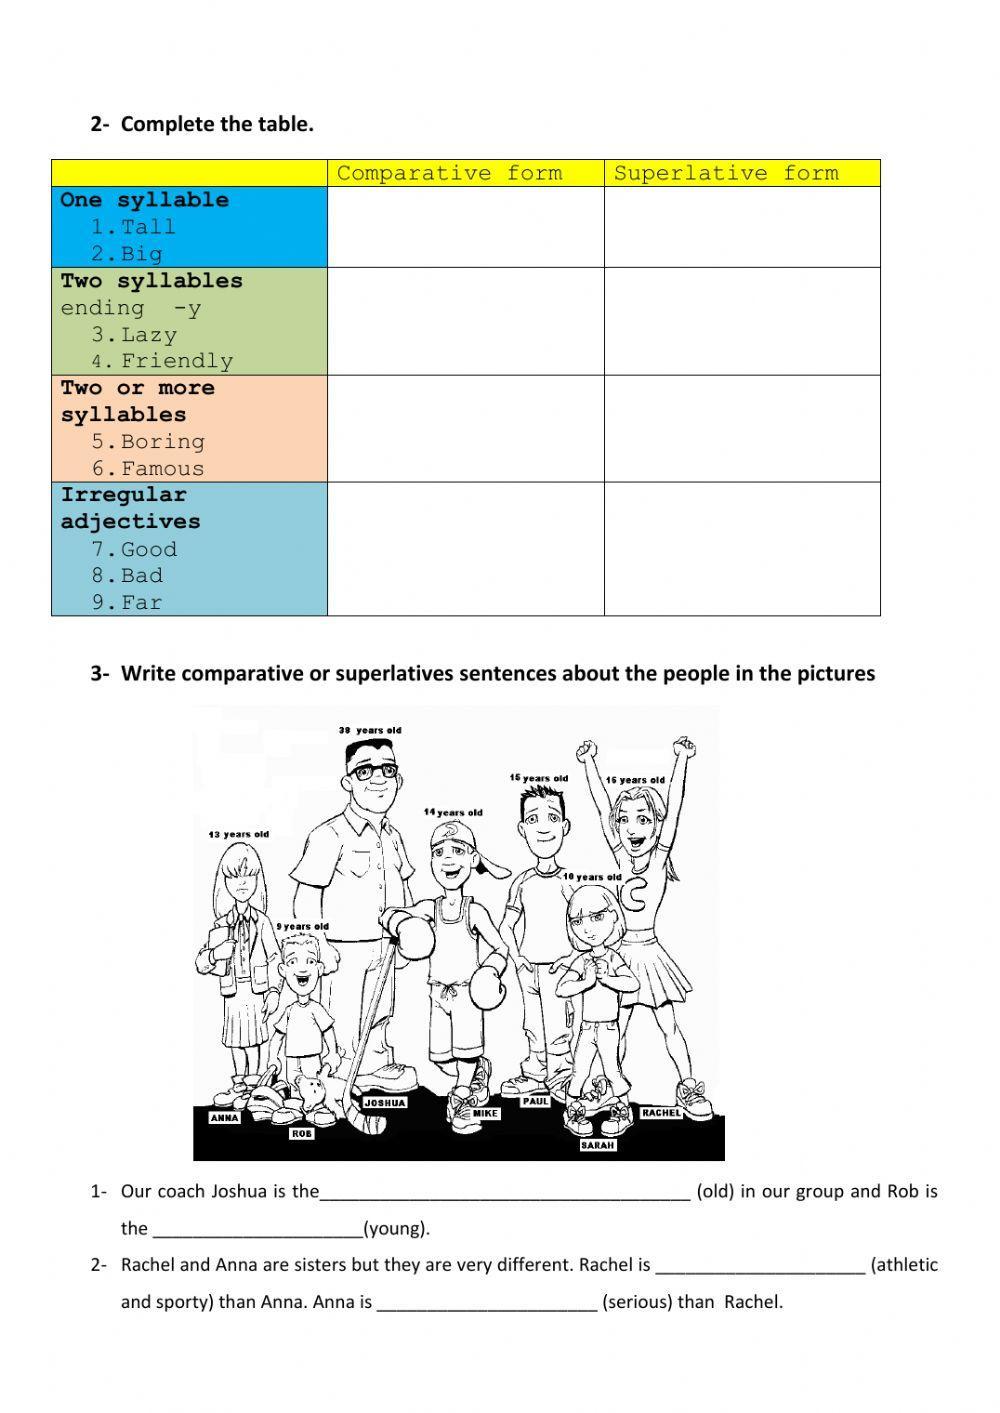 Test on comparatives and superlatives